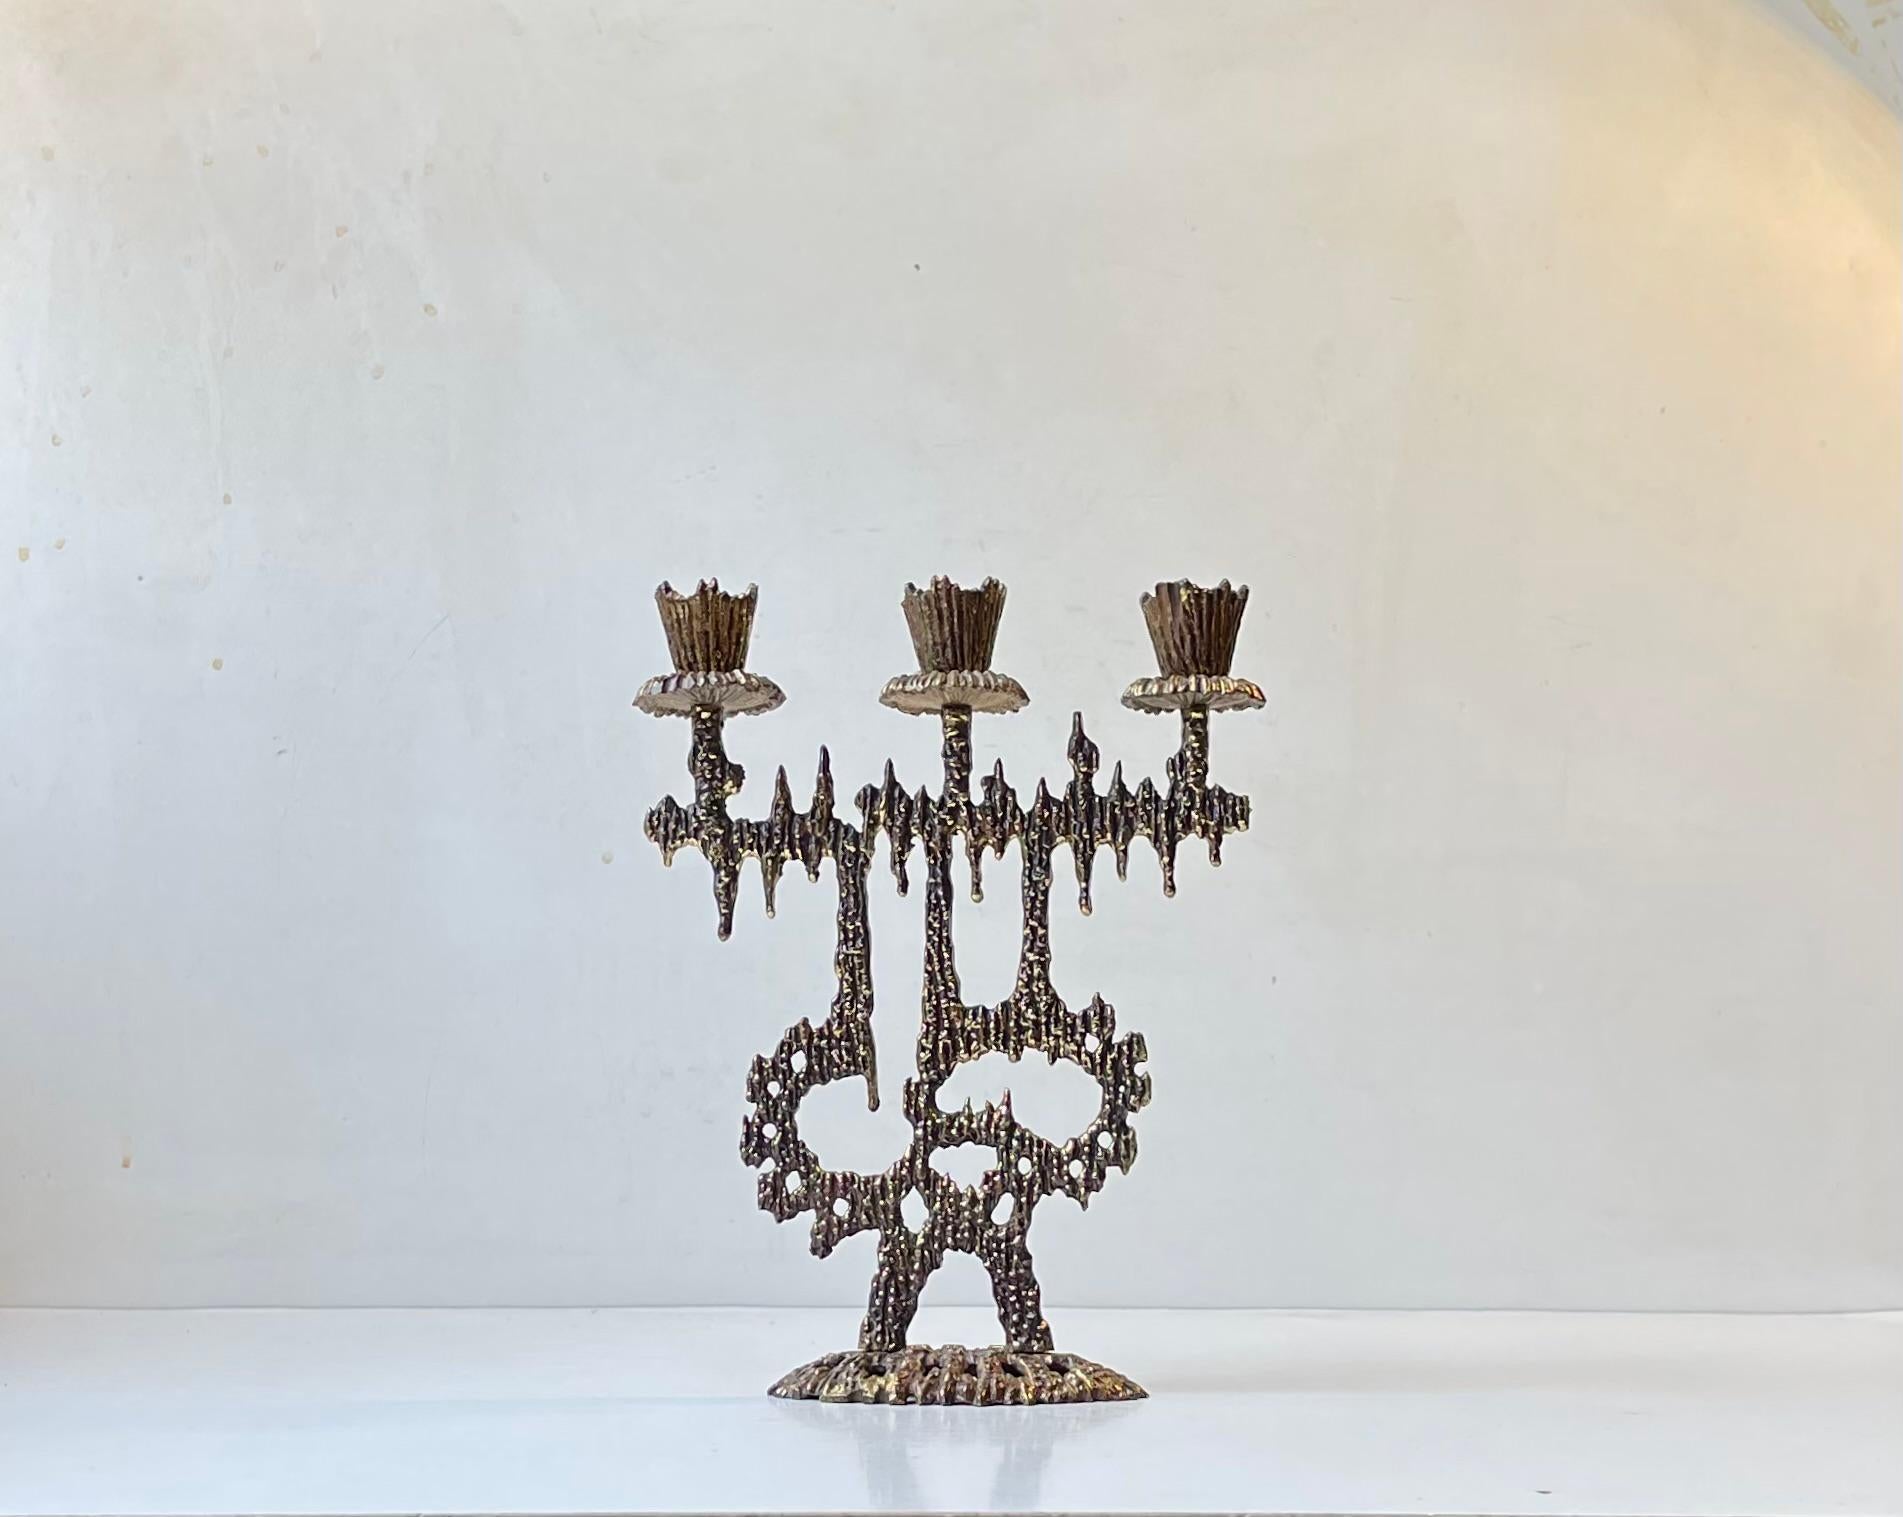 Small intricate Bronze Menorah Candlelabra manufactured by Wainberg in Israel during the 1950s or 60s. Distinct and characteristic brutalist styling. It takes 3 regular sized candles. Stamped: Wainberg and Made in Israel. Measurements: 23x18x6 cm.